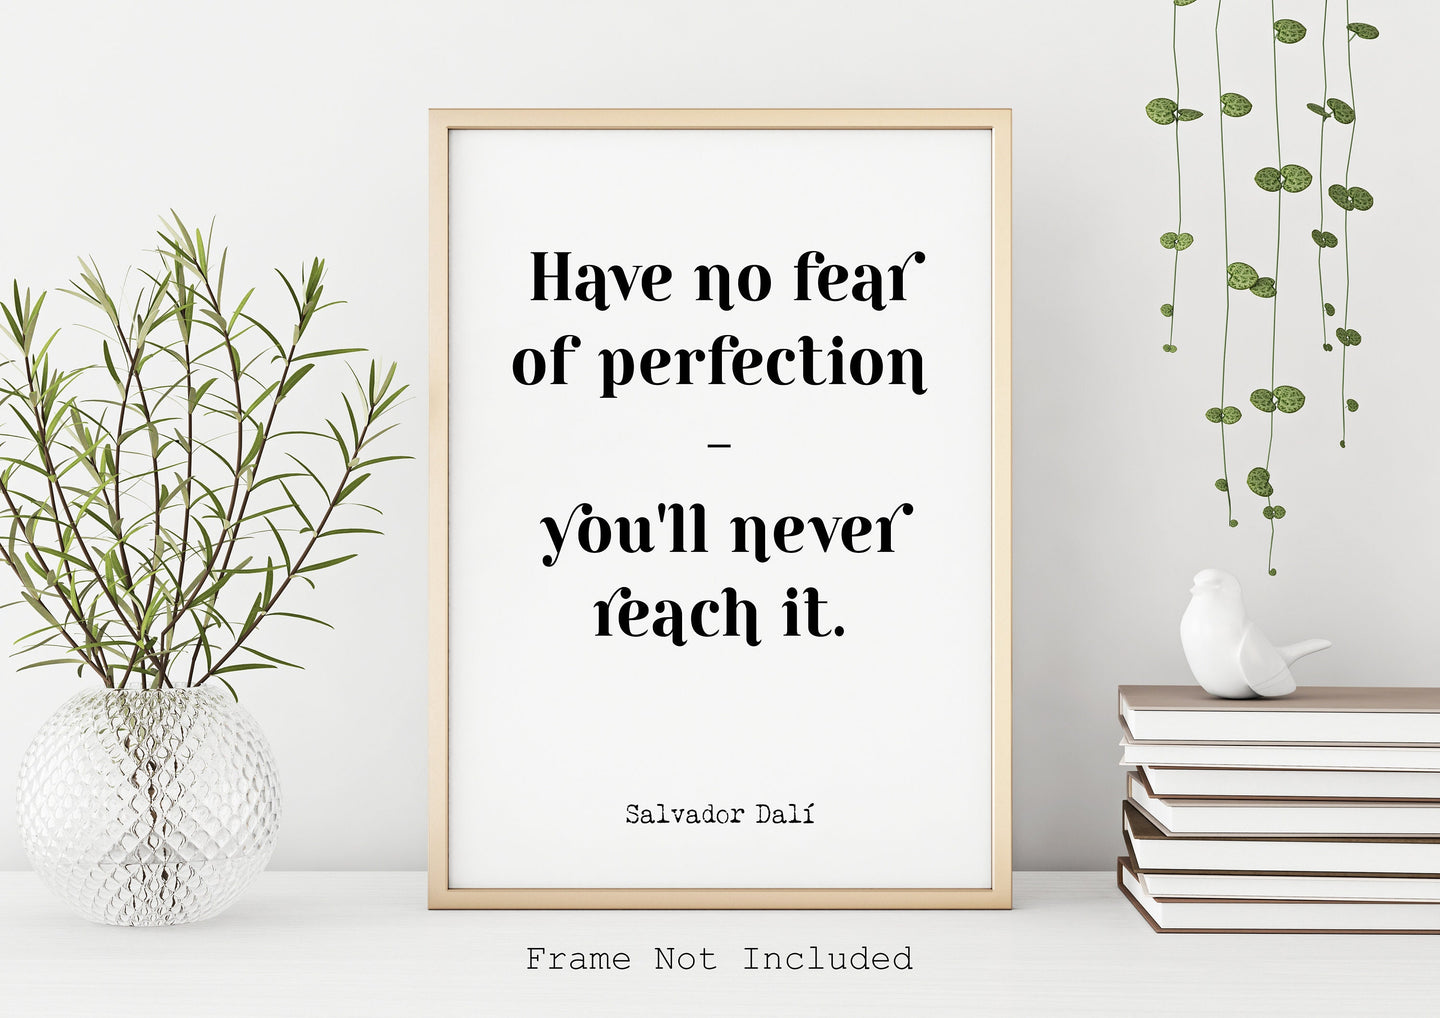 Salvador Dalí Print - Have no fear of perfection - you'll never reach it - Dali poster print - Artist Quote UNFRAMED